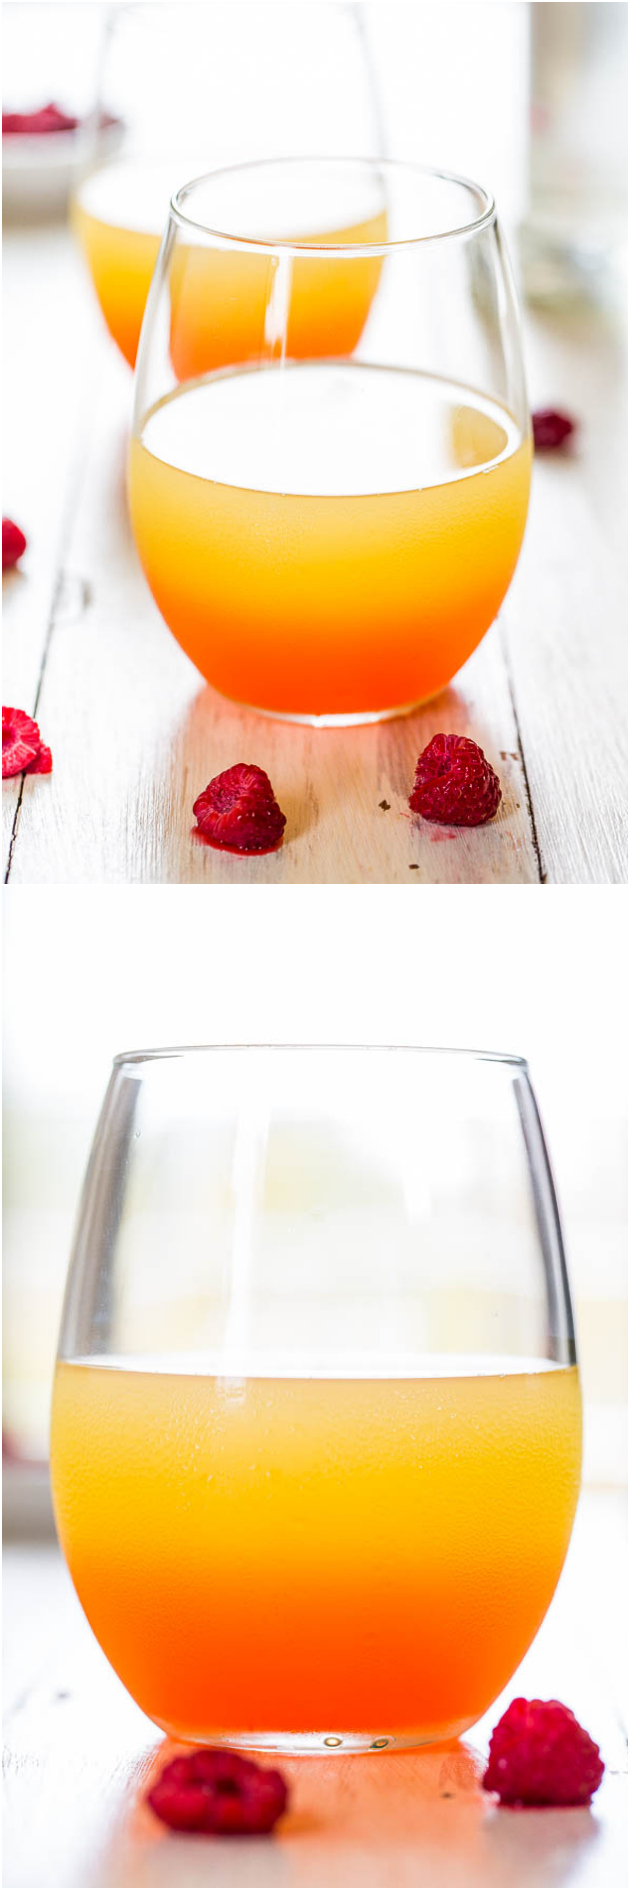 Lightened-Up Raspberry Coconut Punch - Sweet, tangy, refreshing and isn't a caloric lead balloon! But don't worry, it still packs a punch!